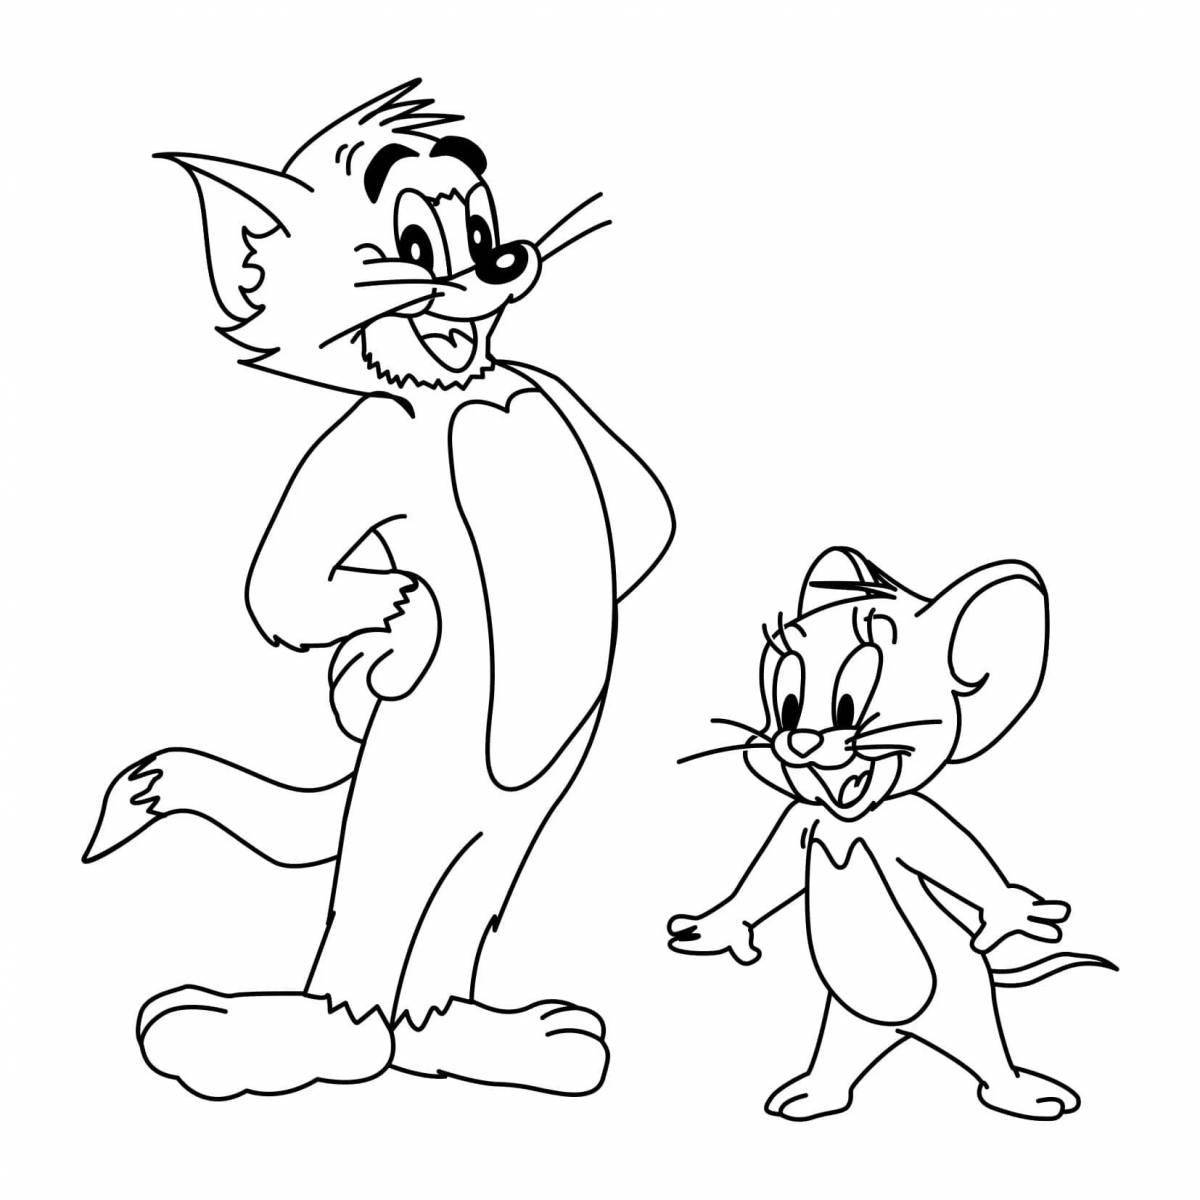 Fun tom and jerry coloring game